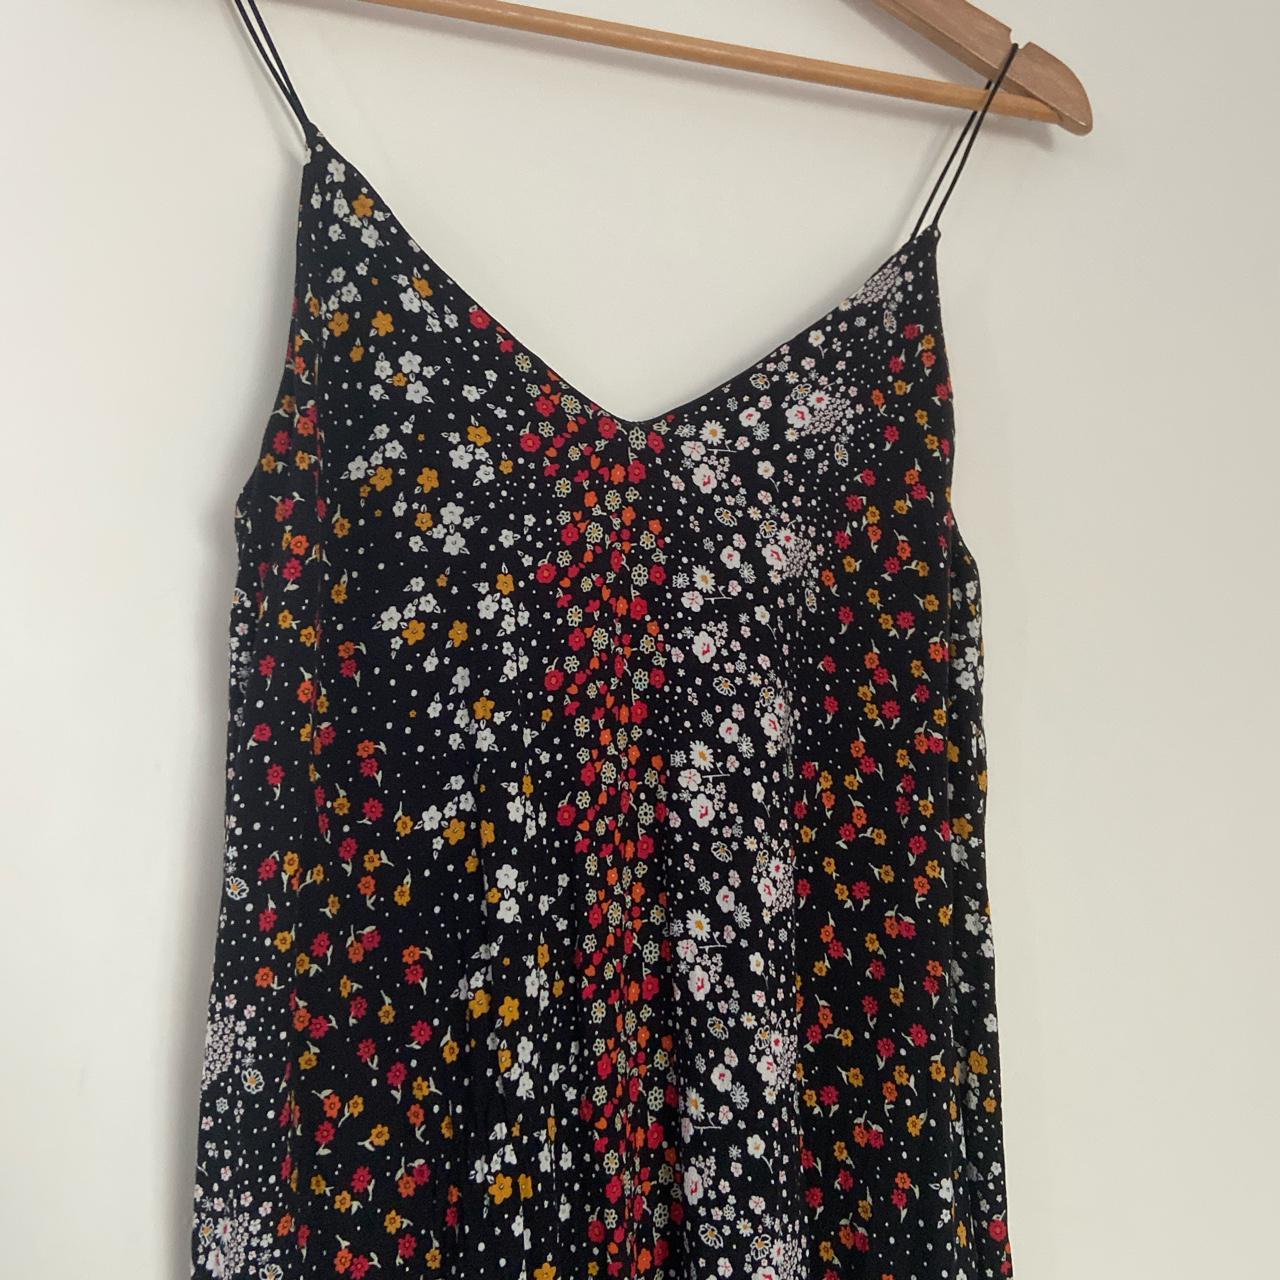 Product Image 3 - Best cami dress ever, I